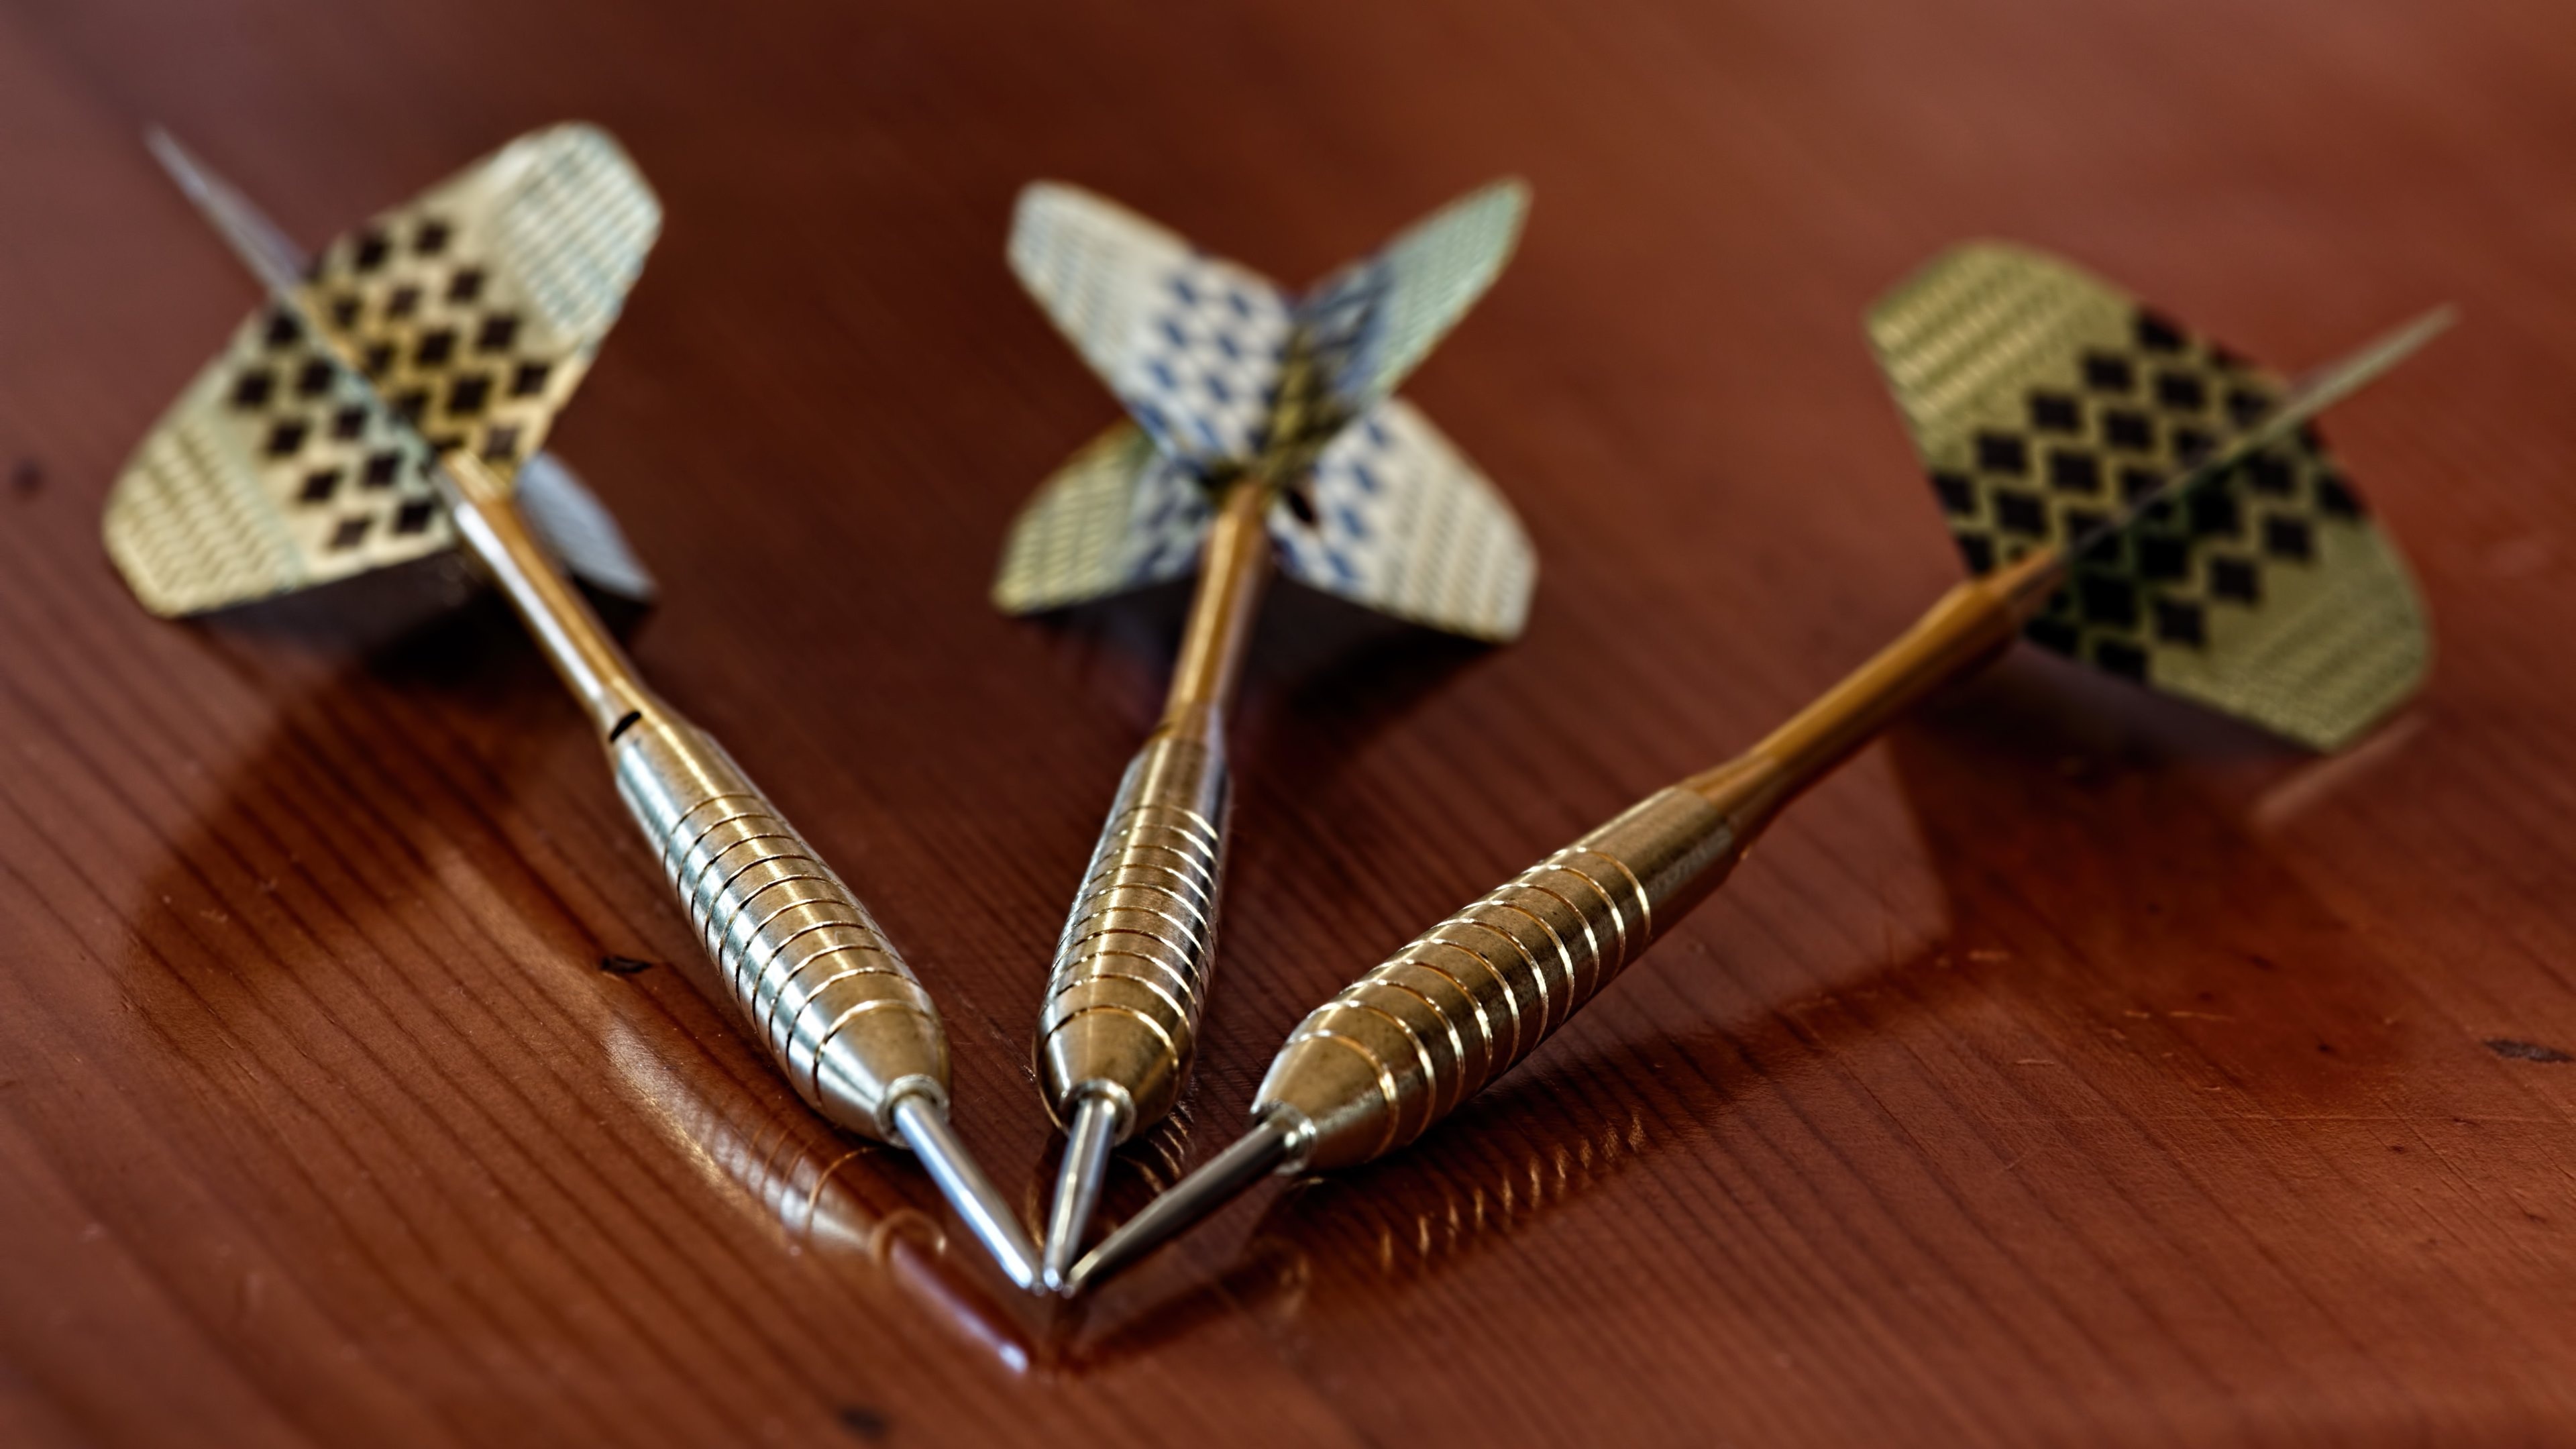 Darts: Parts of a dart, The point, The shaft, The grip, The flight, Nickel silver type. 3840x2160 4K Wallpaper.